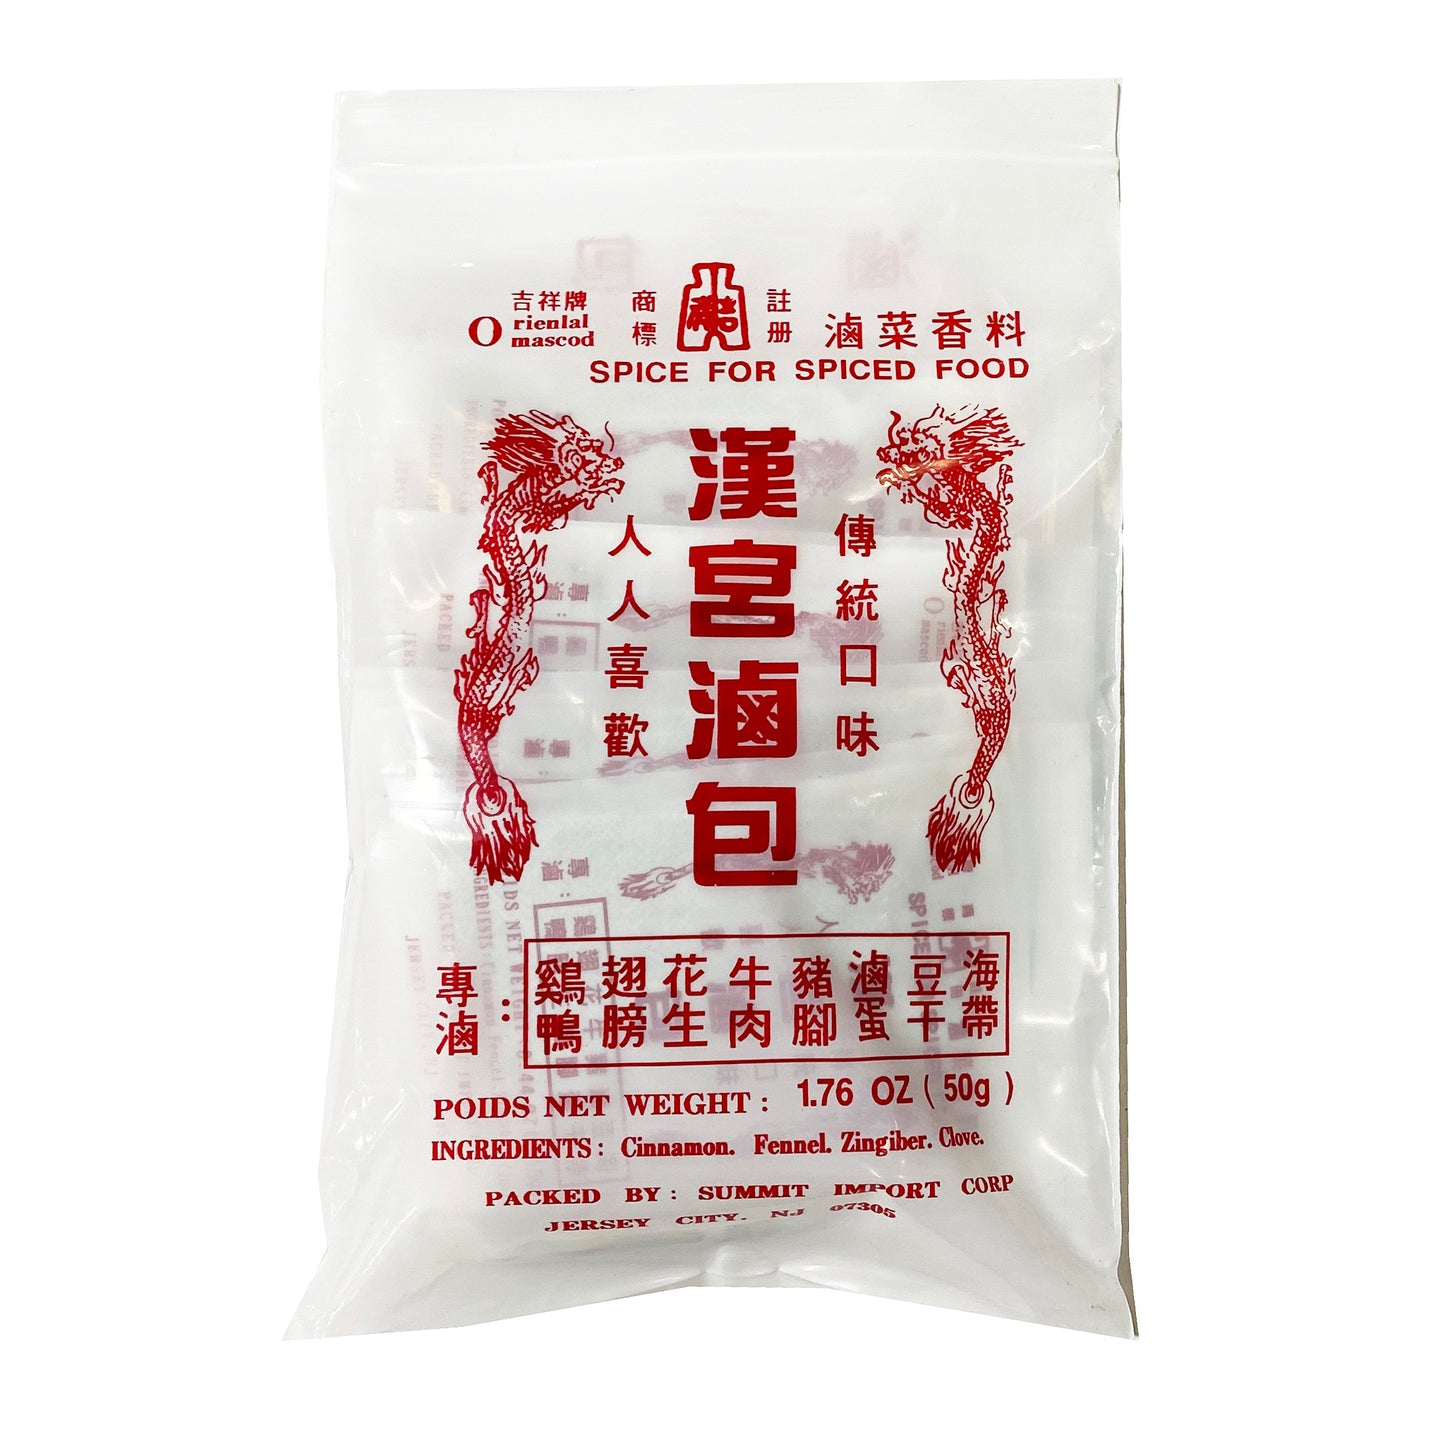 Front graphic image of Oriental Mascot Spice For Spiced Food Packet 1.76oz